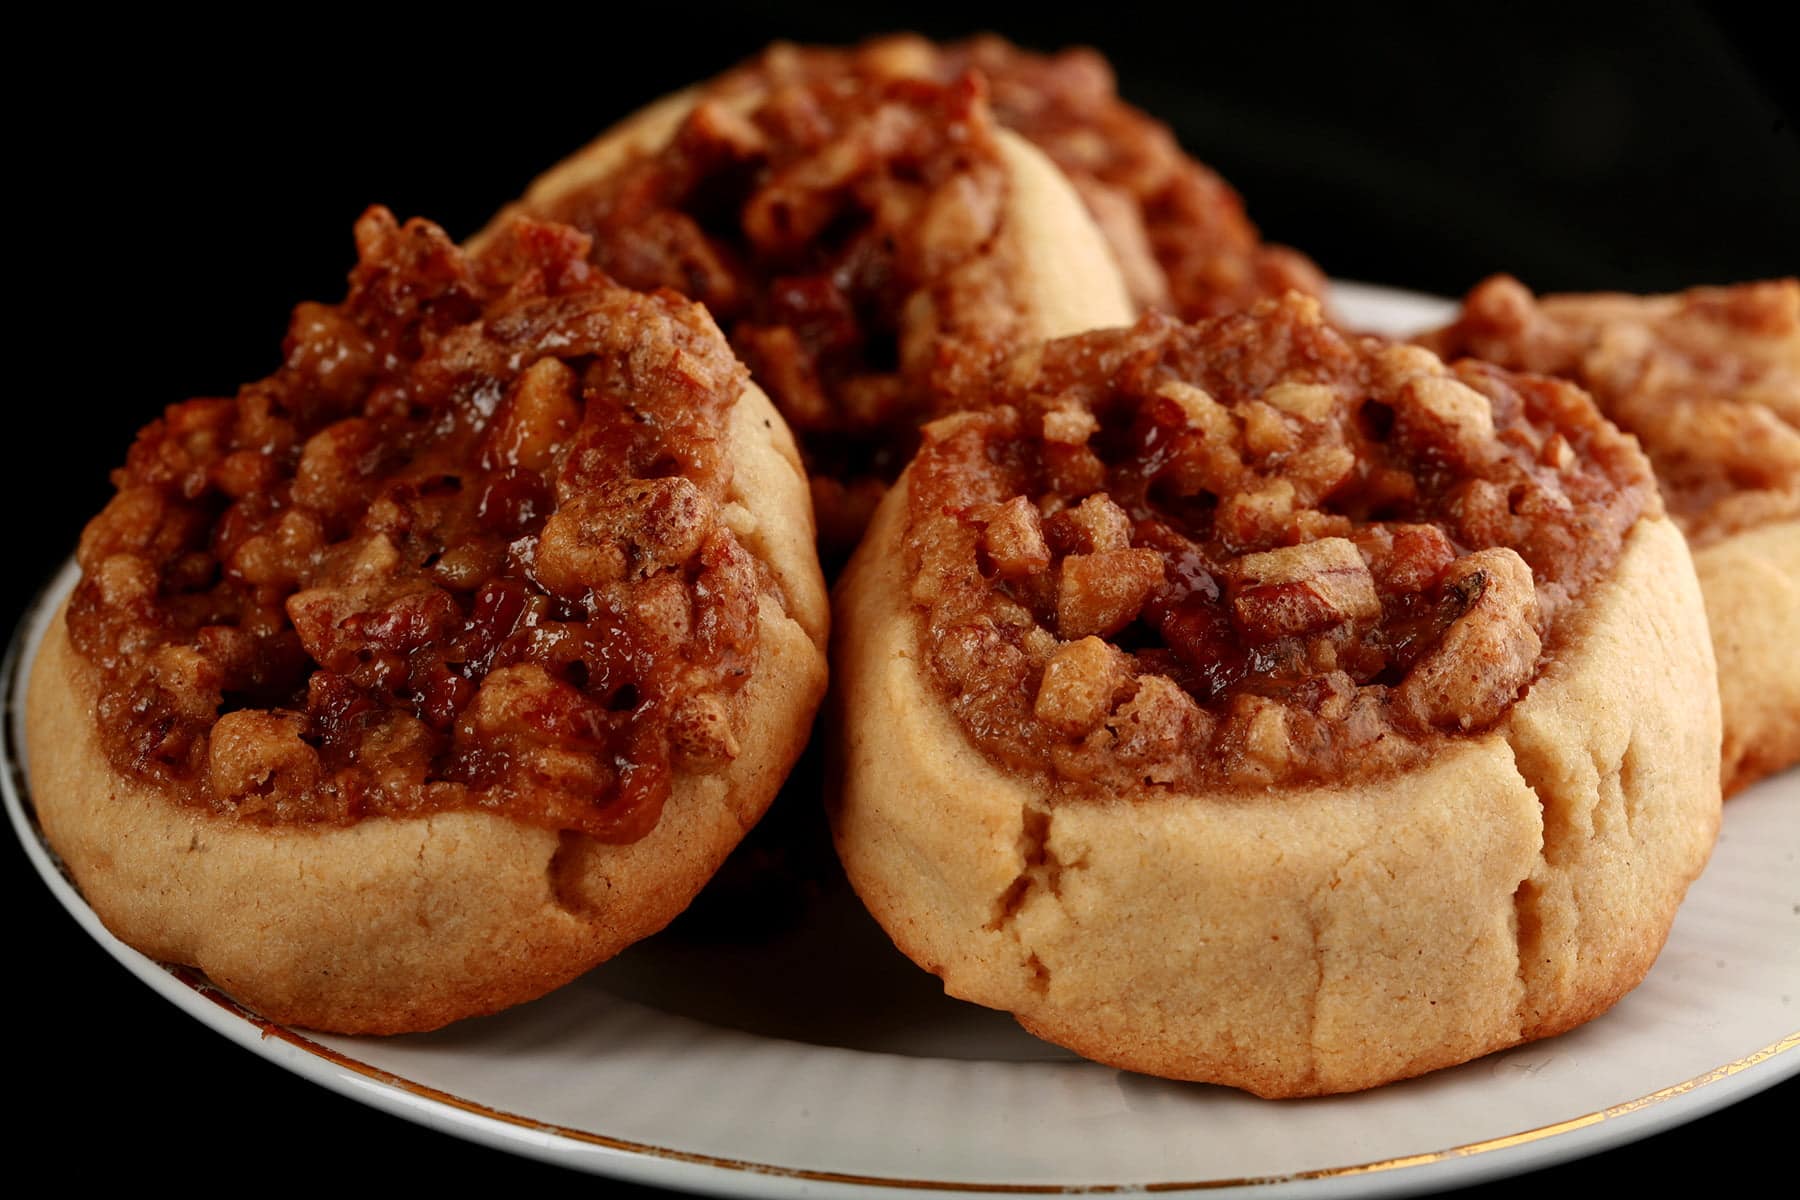 A small plate with Pecan Pie Cookies on it. Each cookie is round and golden brown, with a center indentation filled with chopped pecans and caramelized brown sugar.